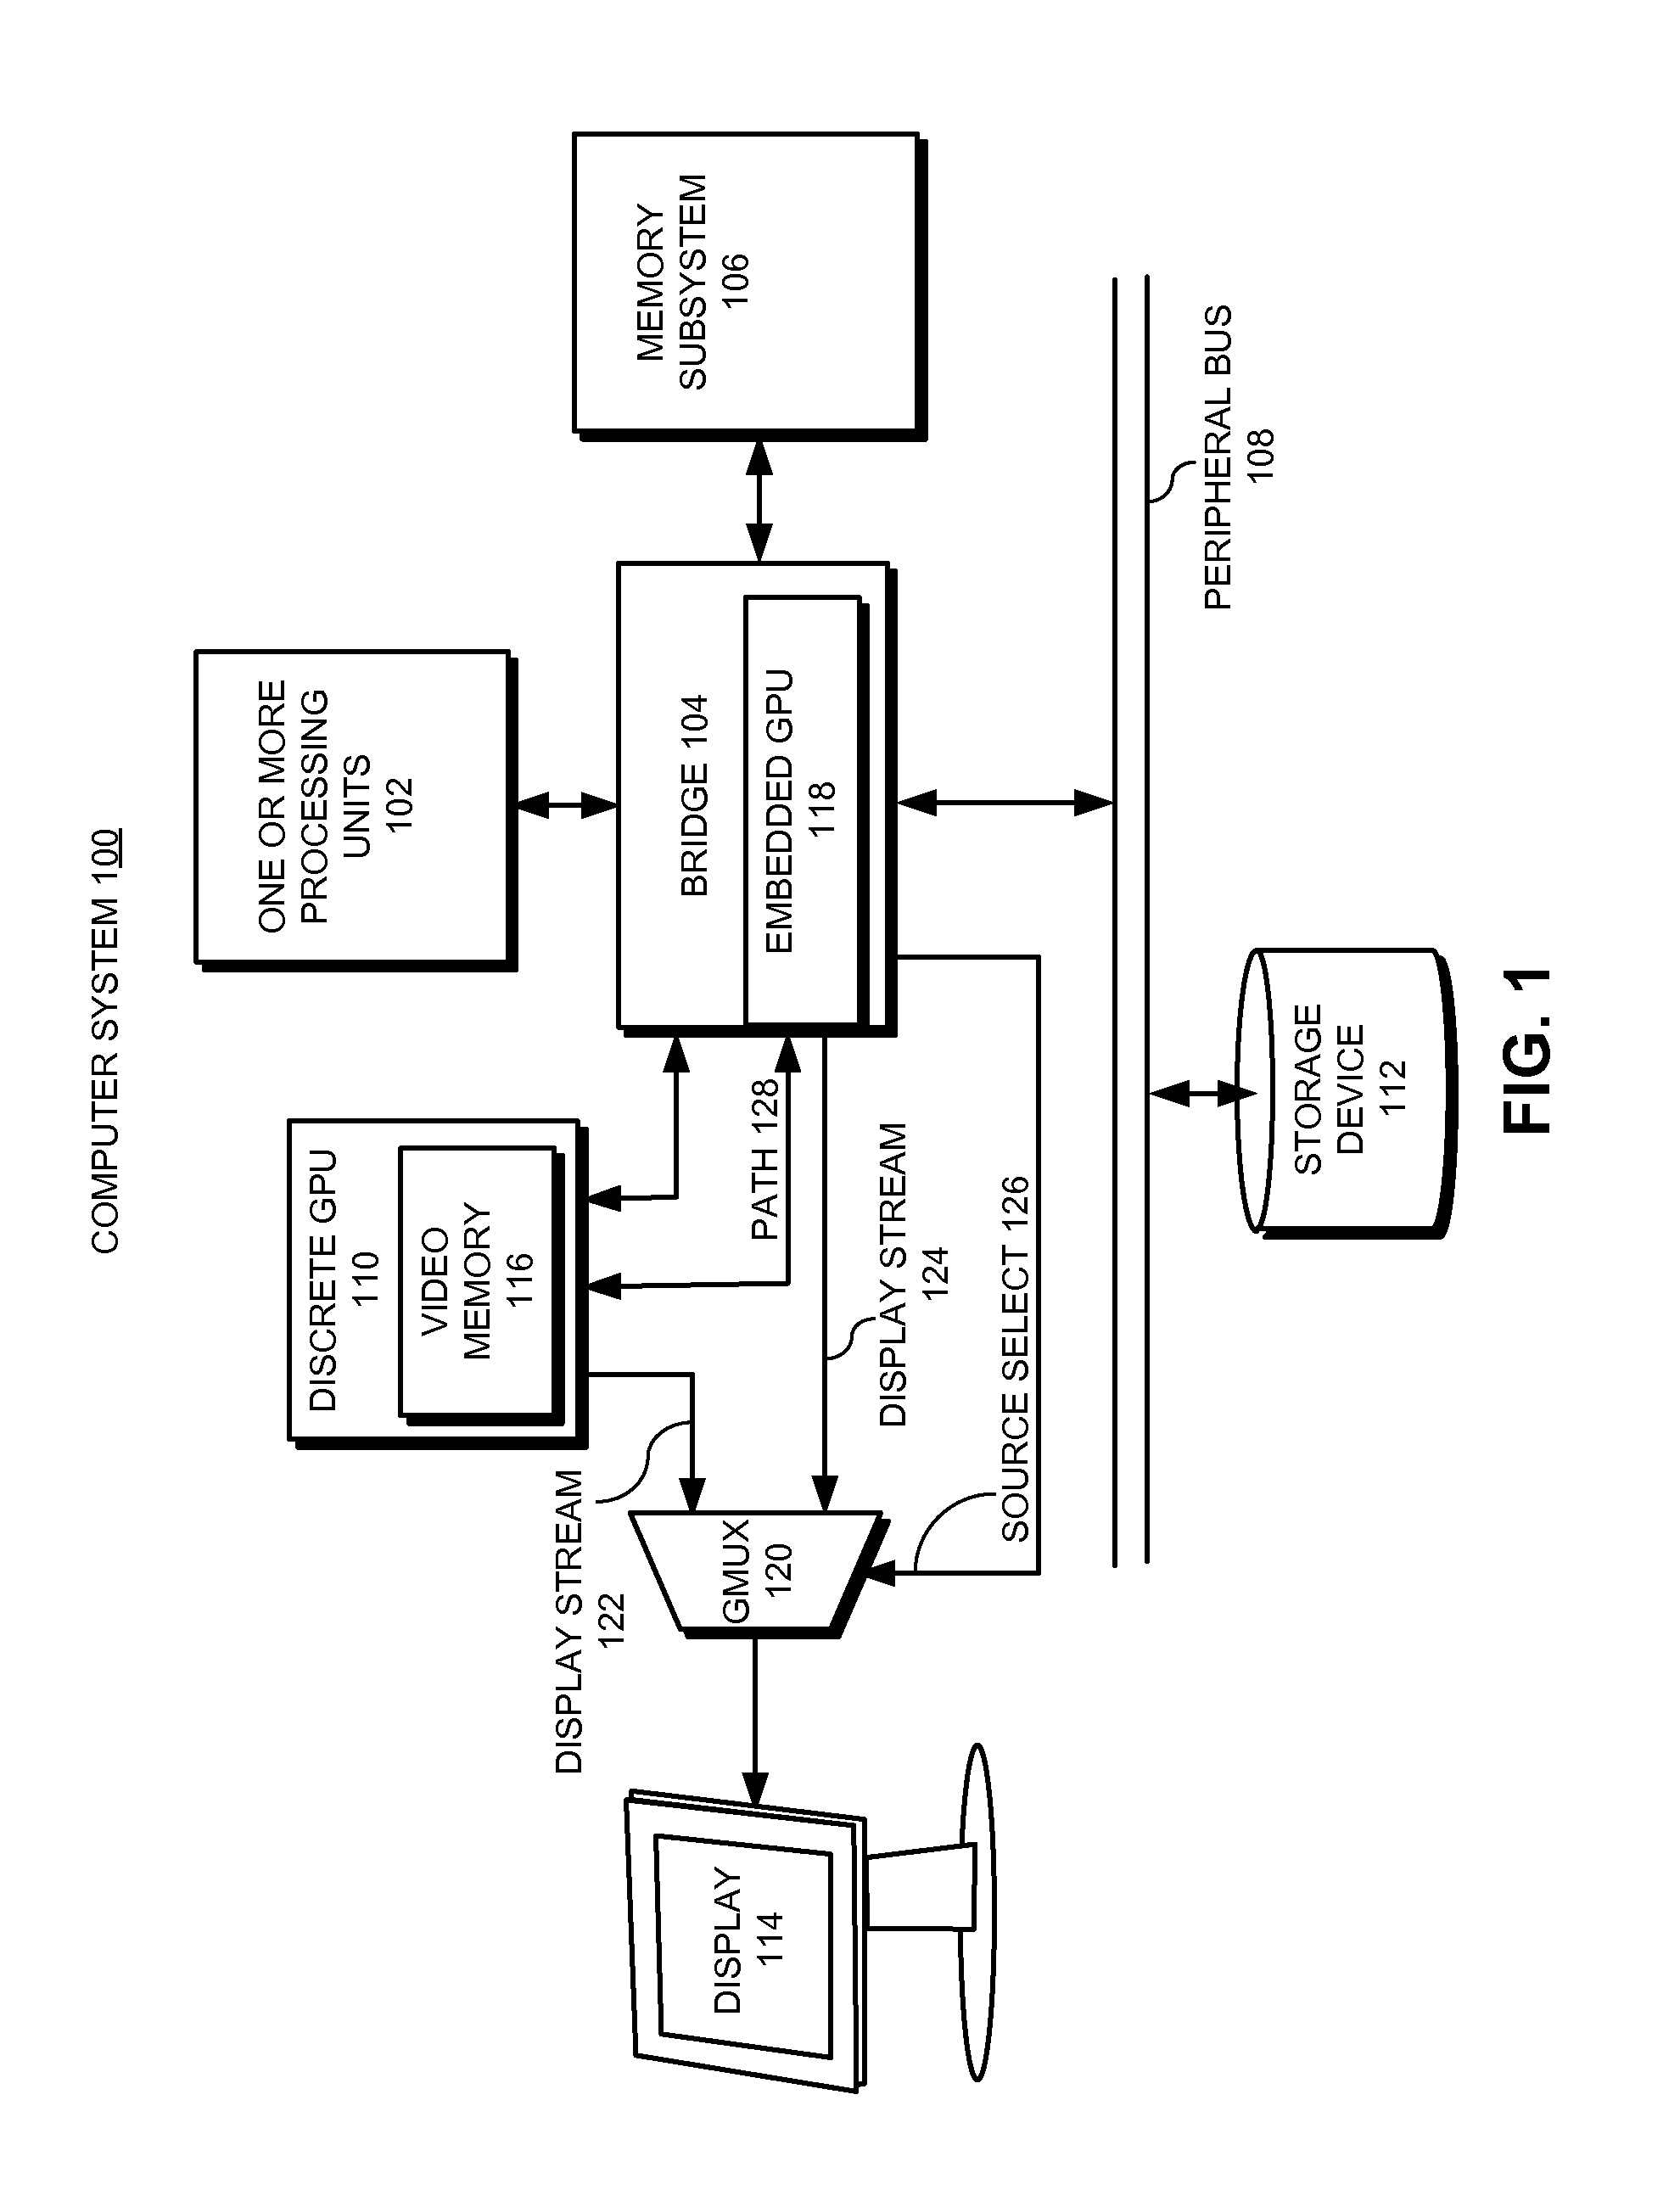 Facilitating efficient switching between graphics-processing units